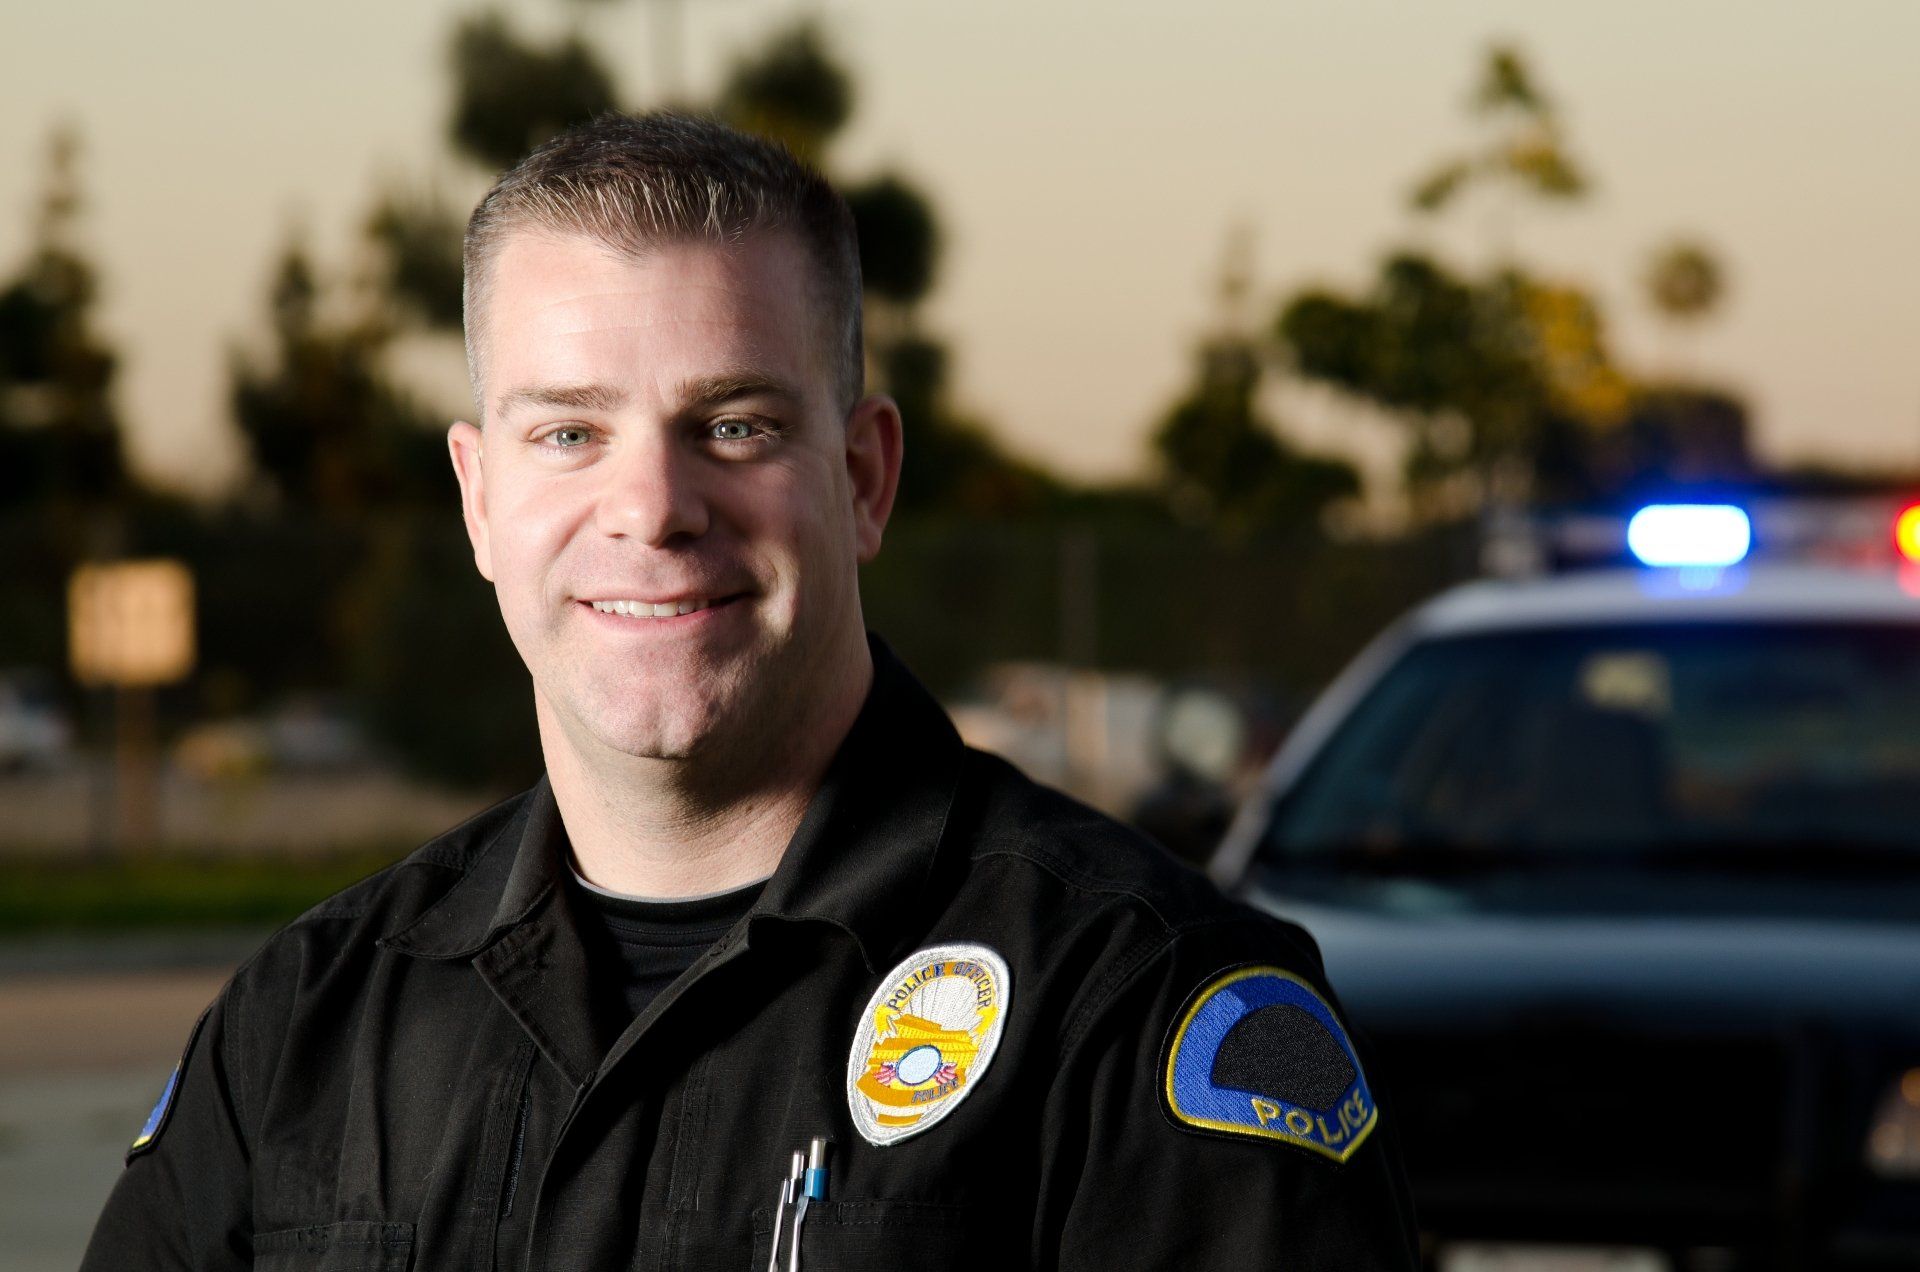 A police officer is smiling in front of a police car.